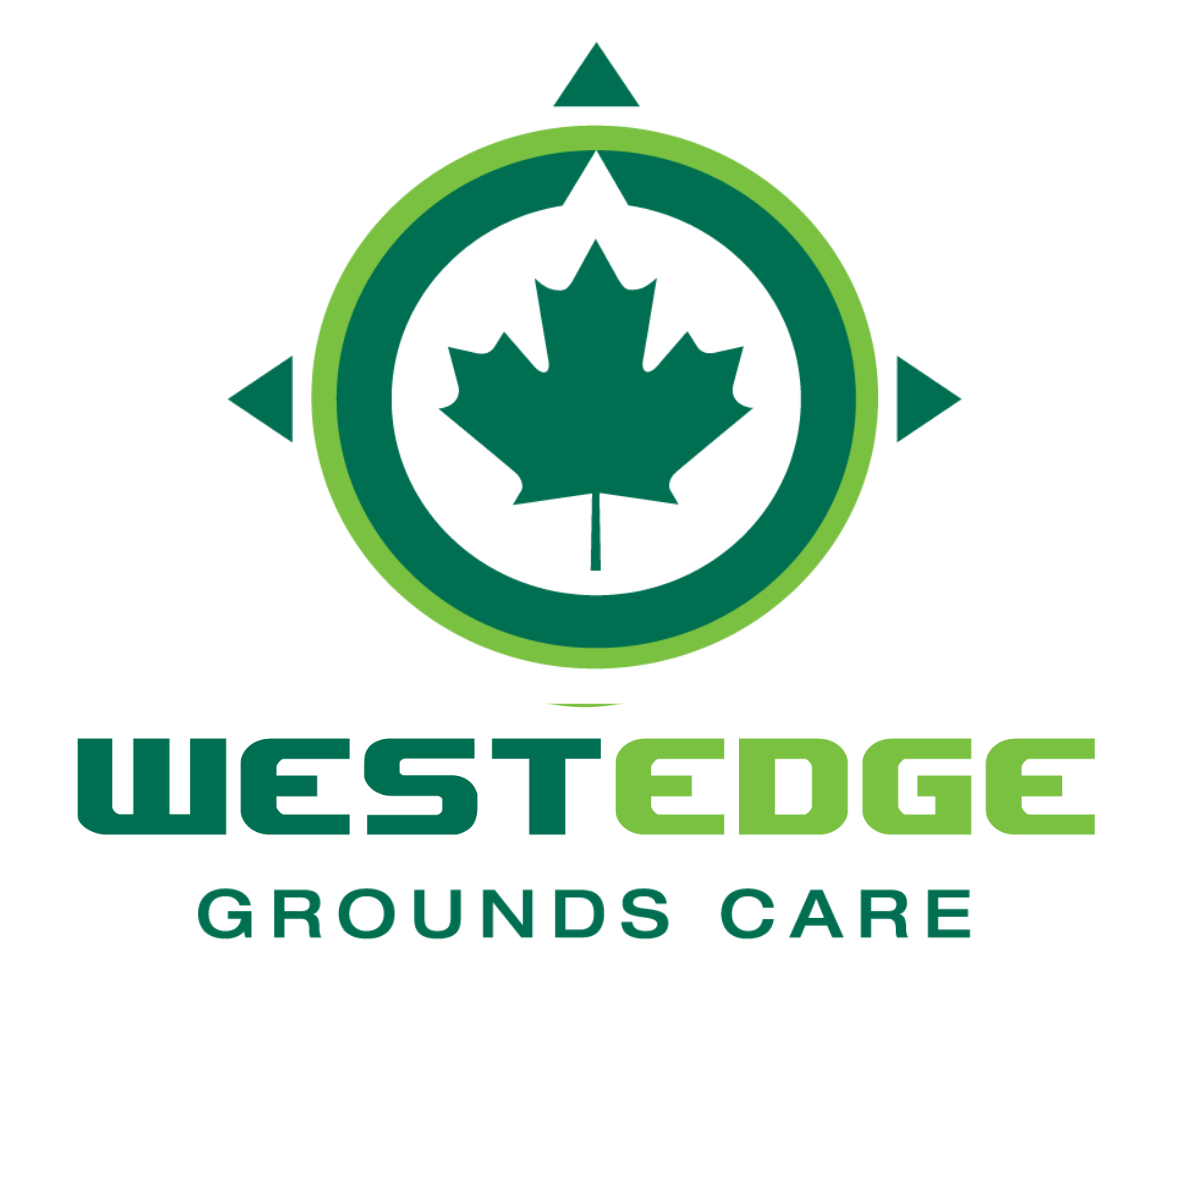 Westedge Grounds Care, Lawn Service and Property Maintenance in MN